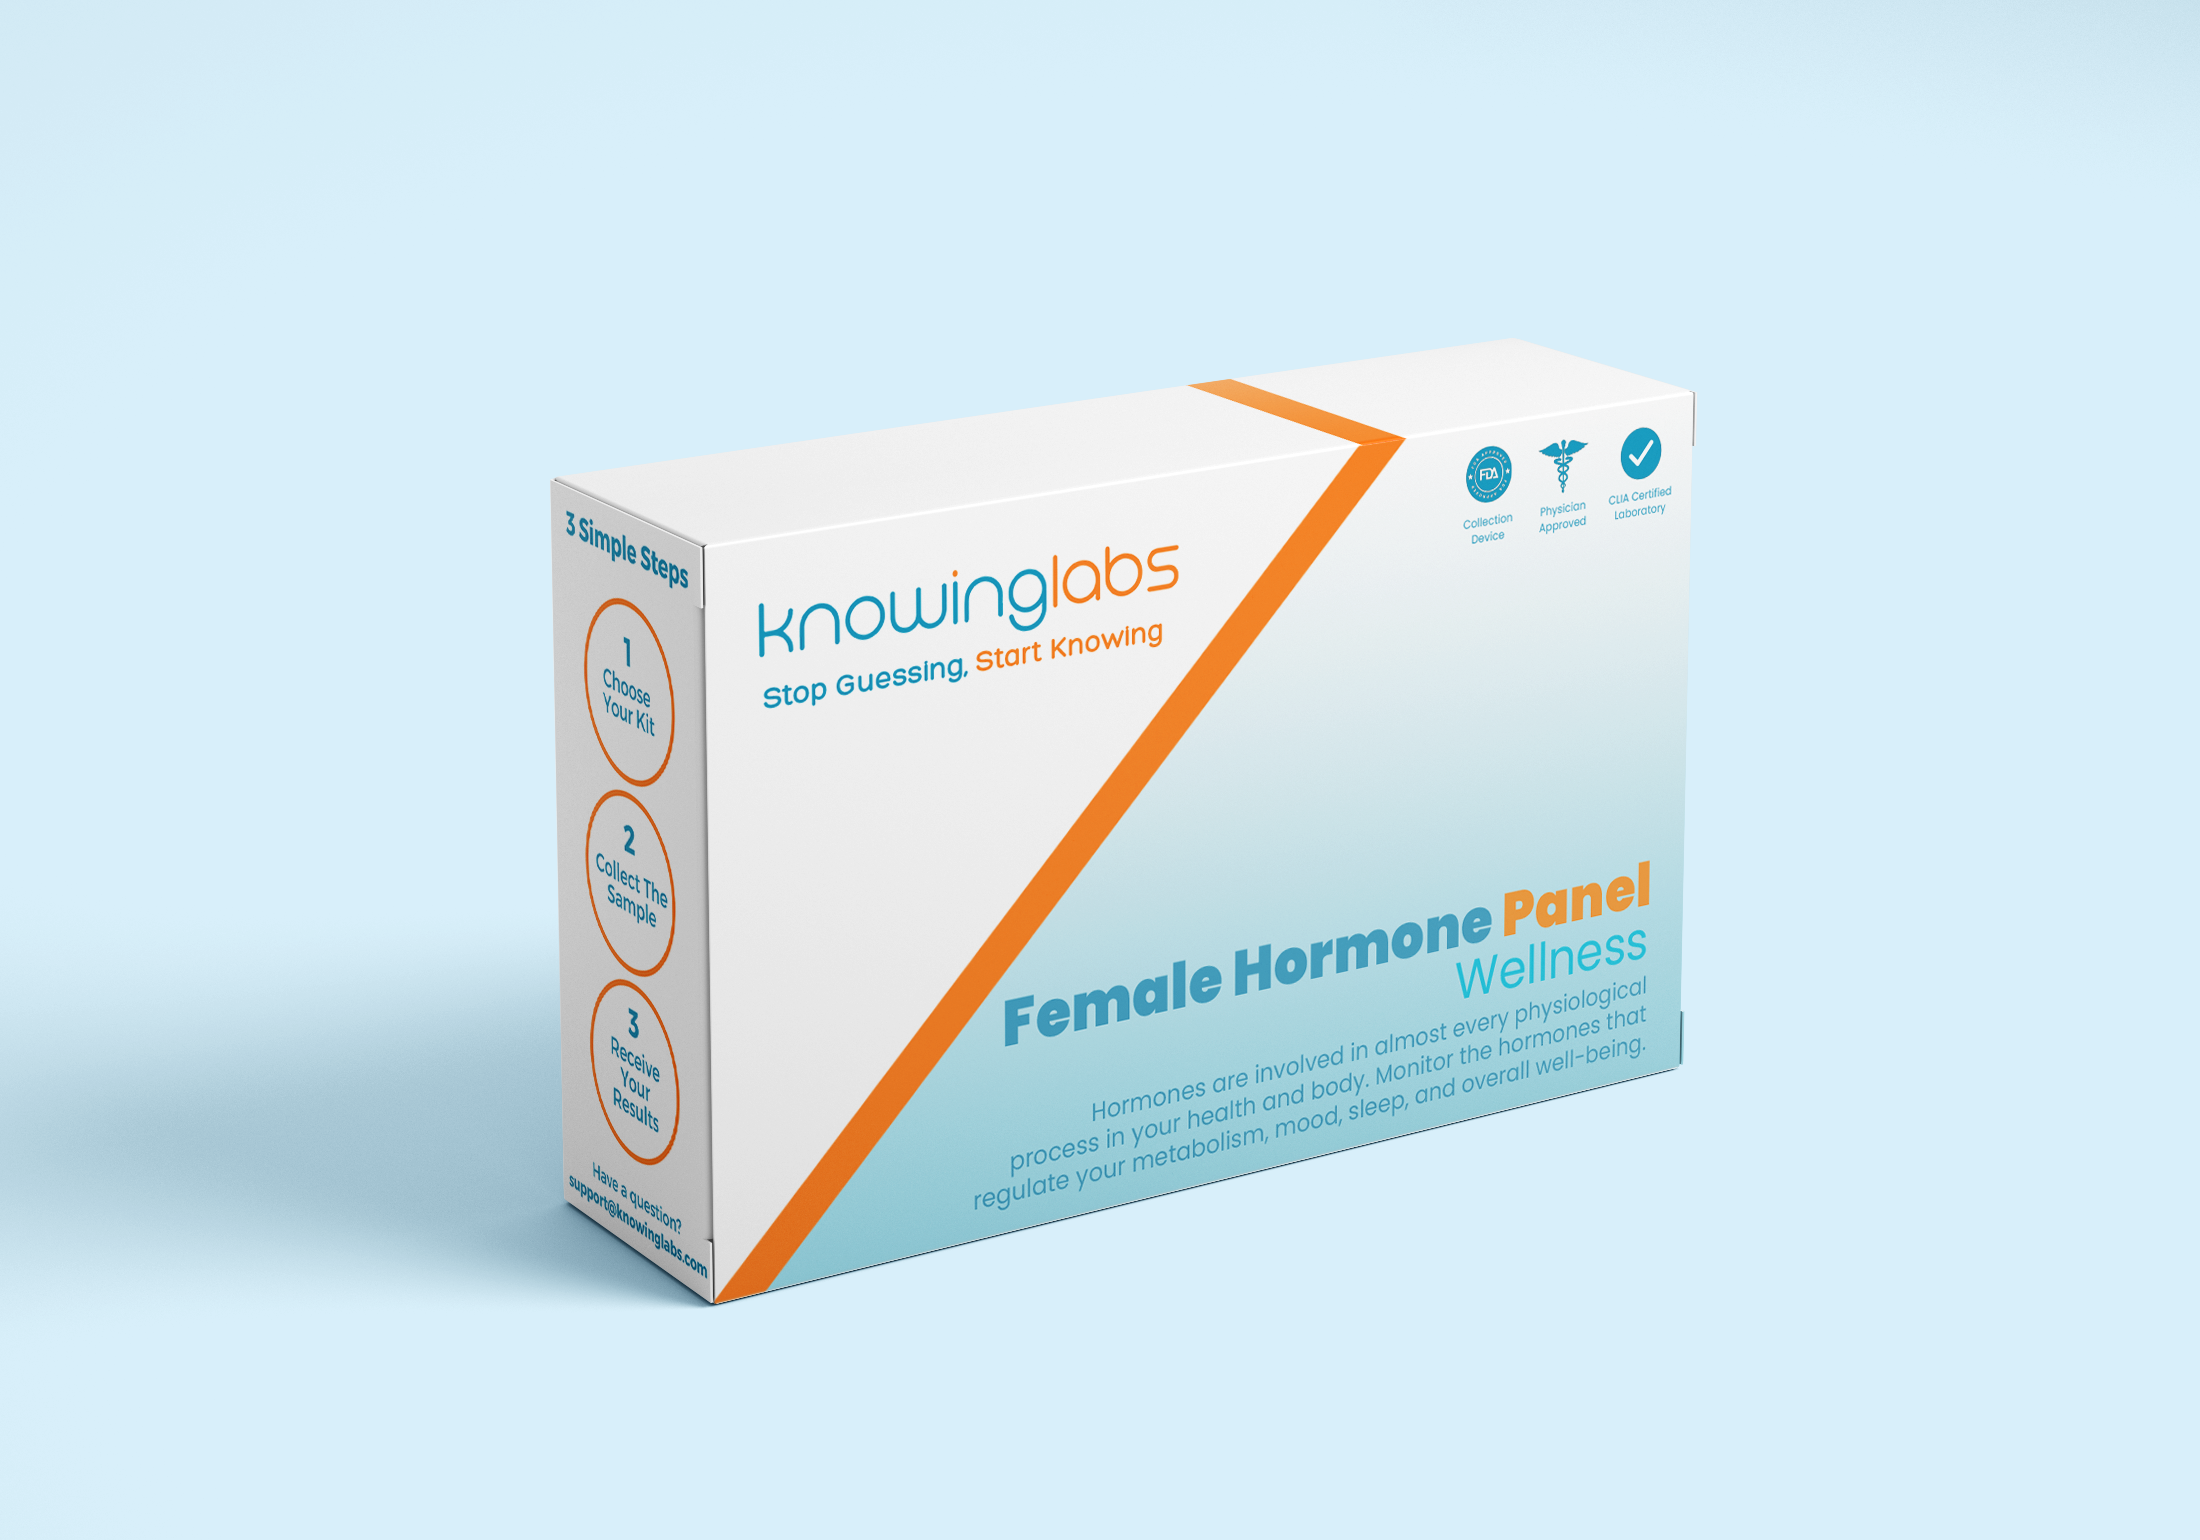 Female Hormone Panel – Knowing Labs